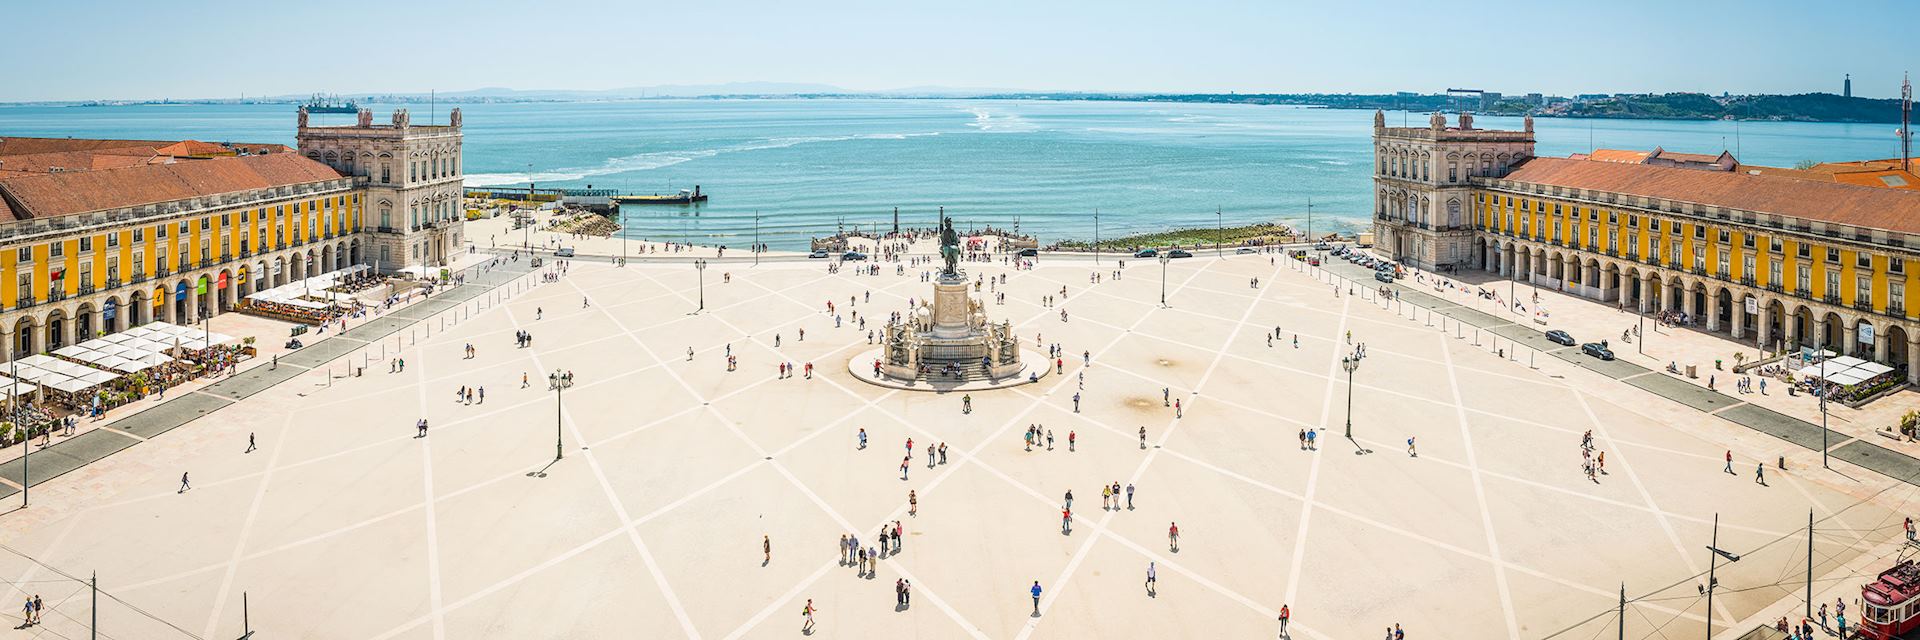 Lisbon is the third European city with the highest growth in the number of millionaires